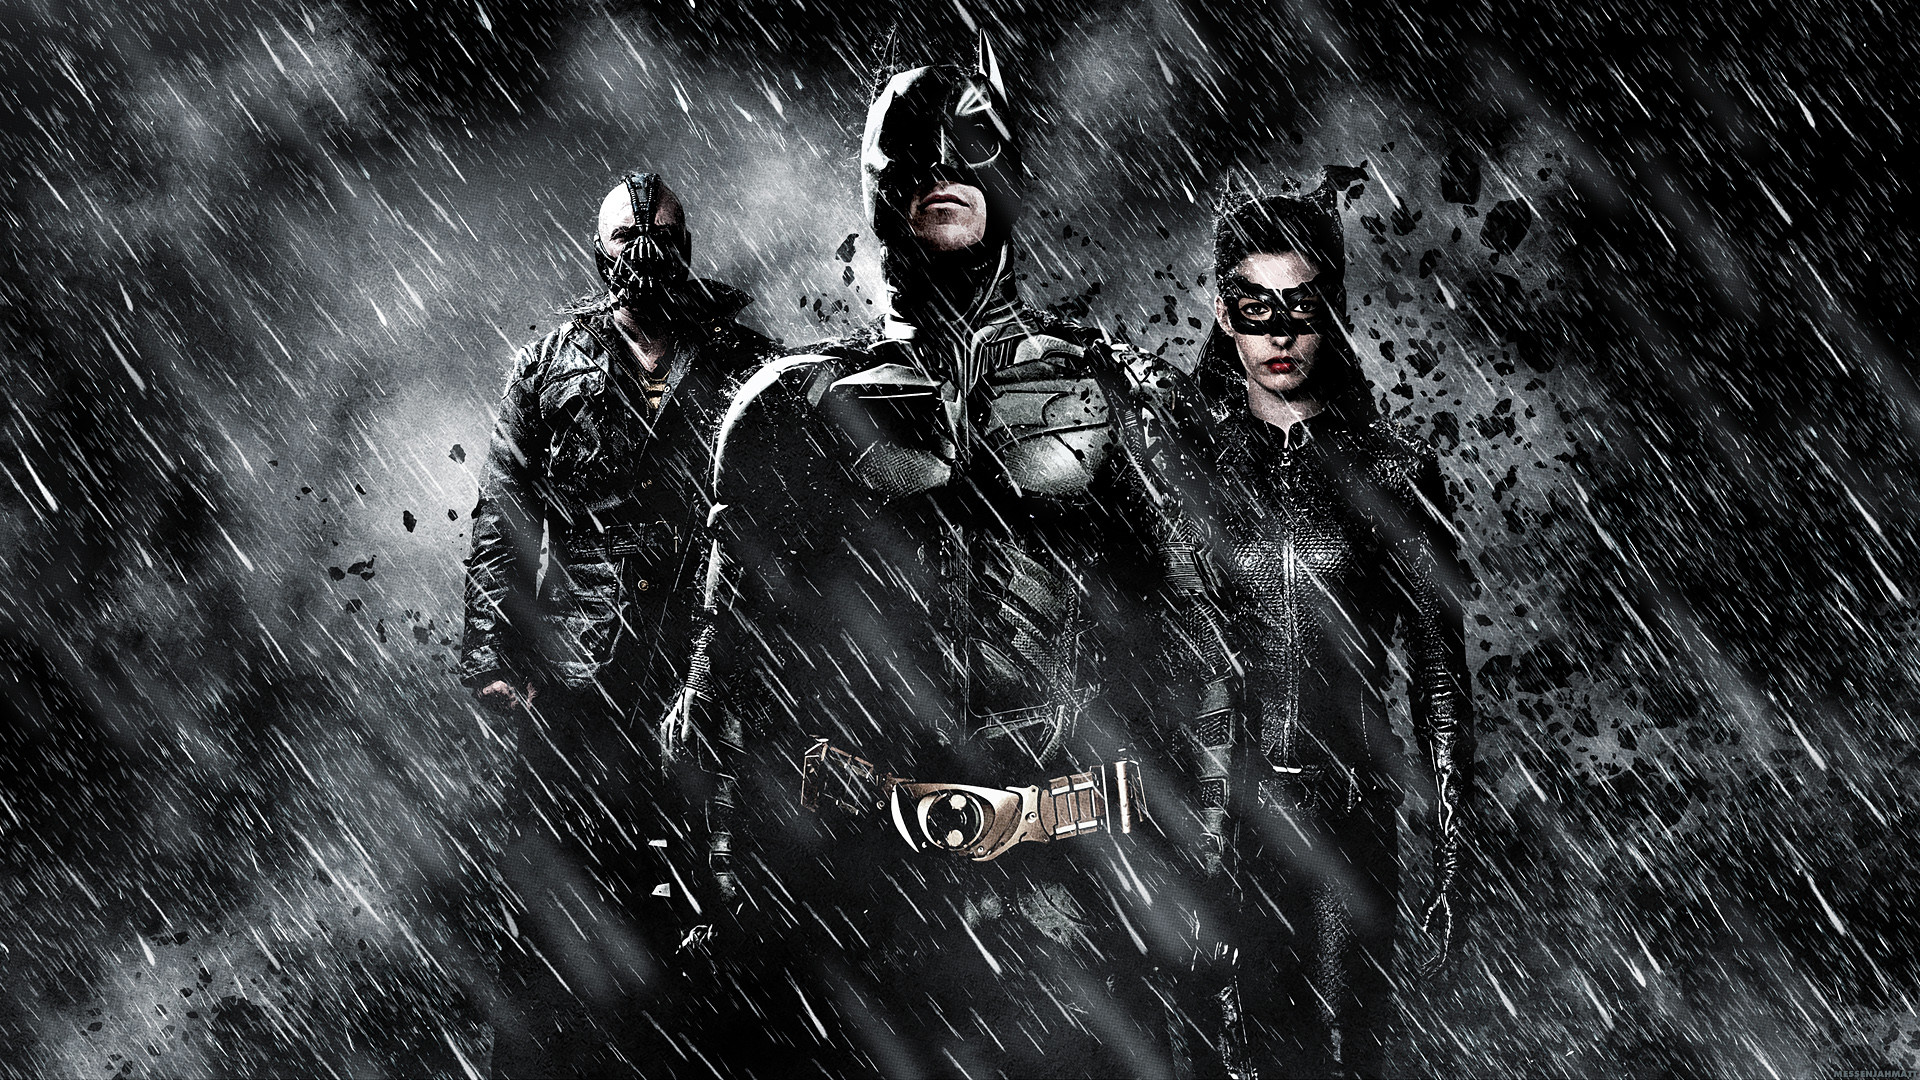 1920x1080 The Dark Knight Rises Movie Wallpapers | HD Wallpapers